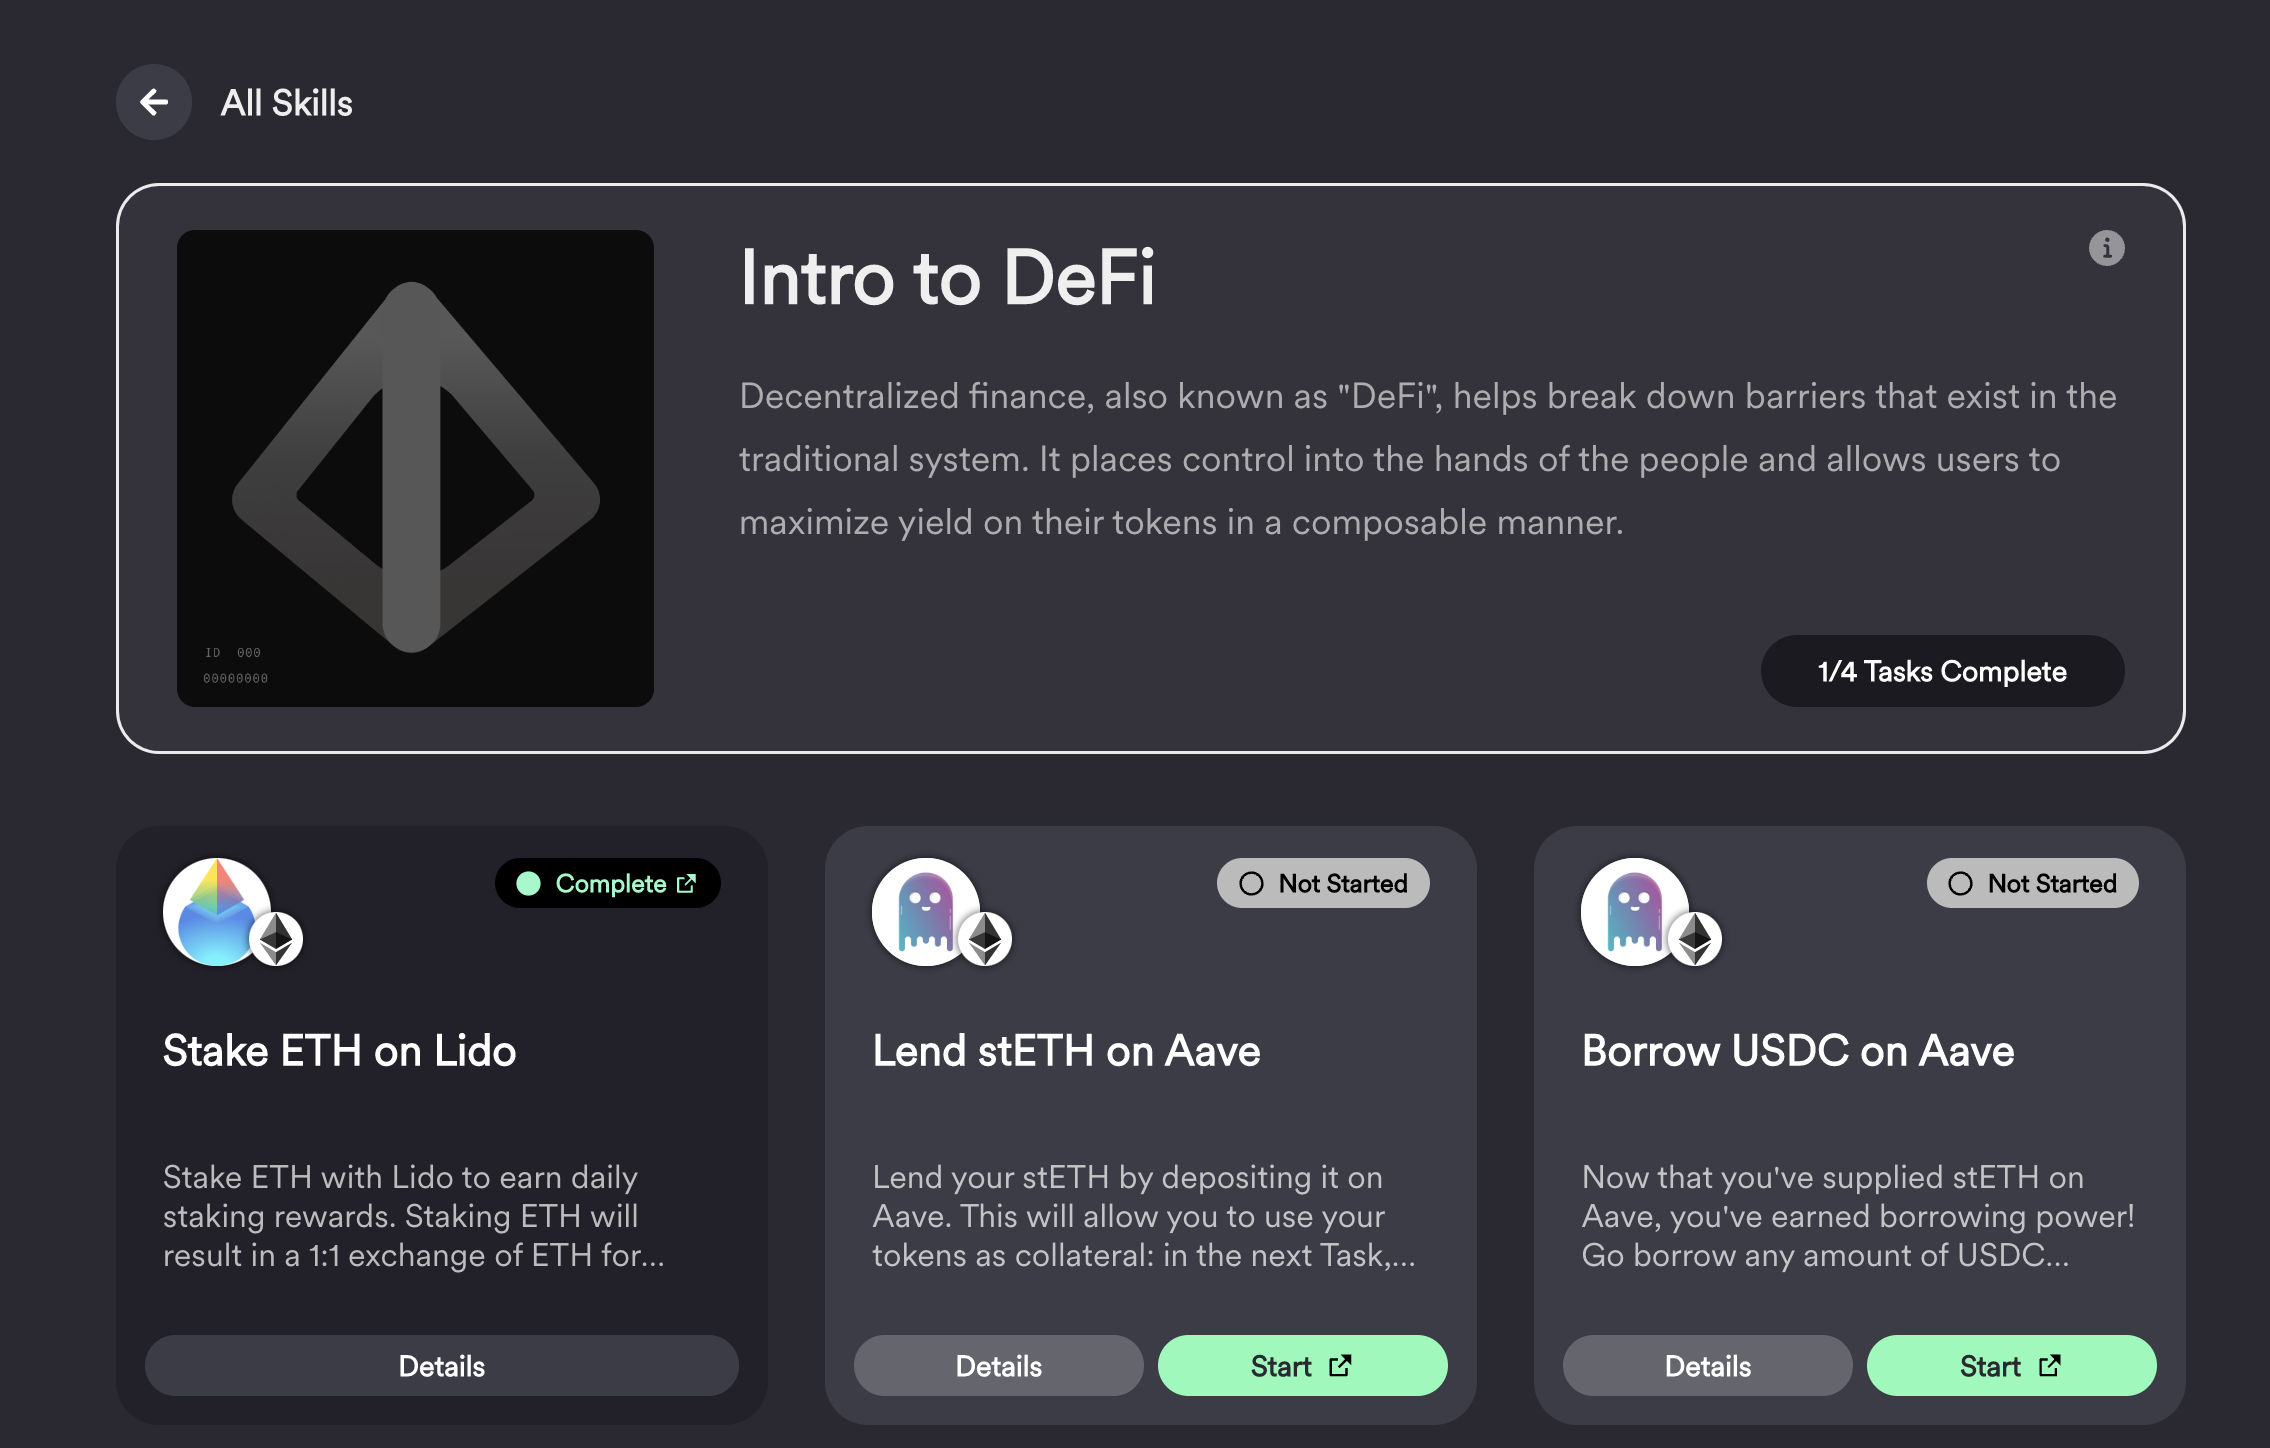 You can also redeem the Stake ETH on Lido task in Intro to Defi